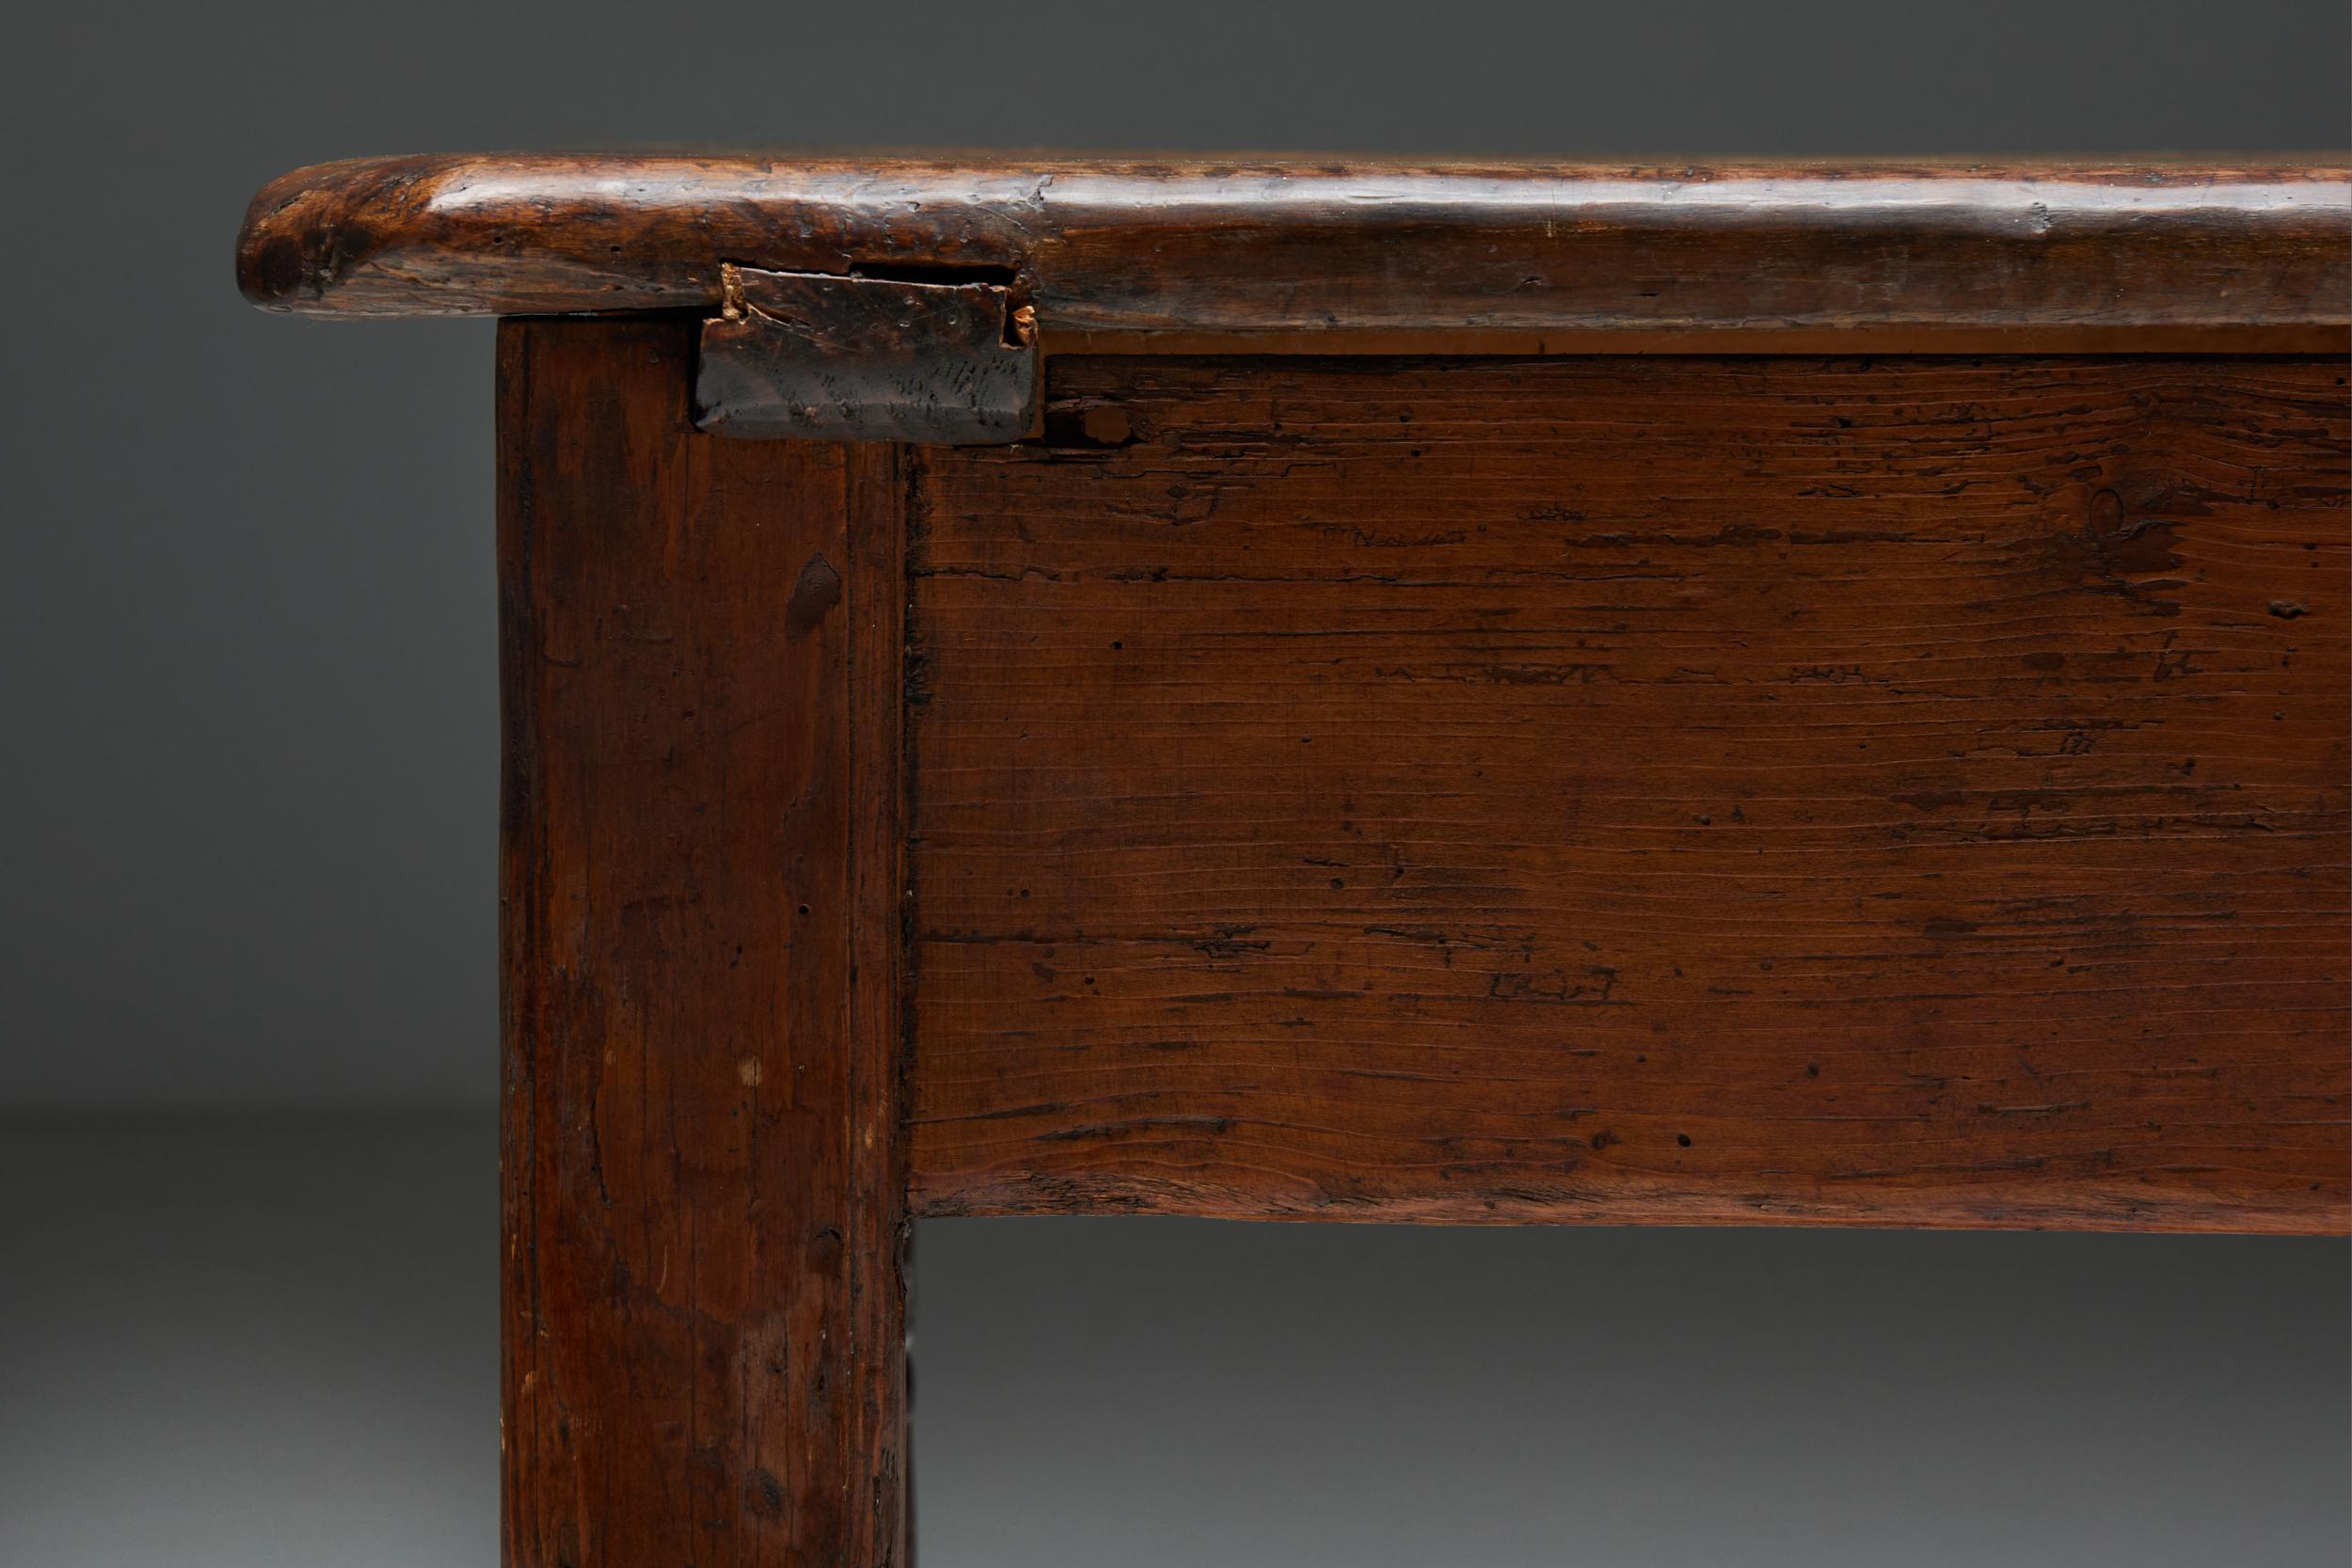 Rustic Art Populaire Writing Table, France, Early 20th Century For Sale 5